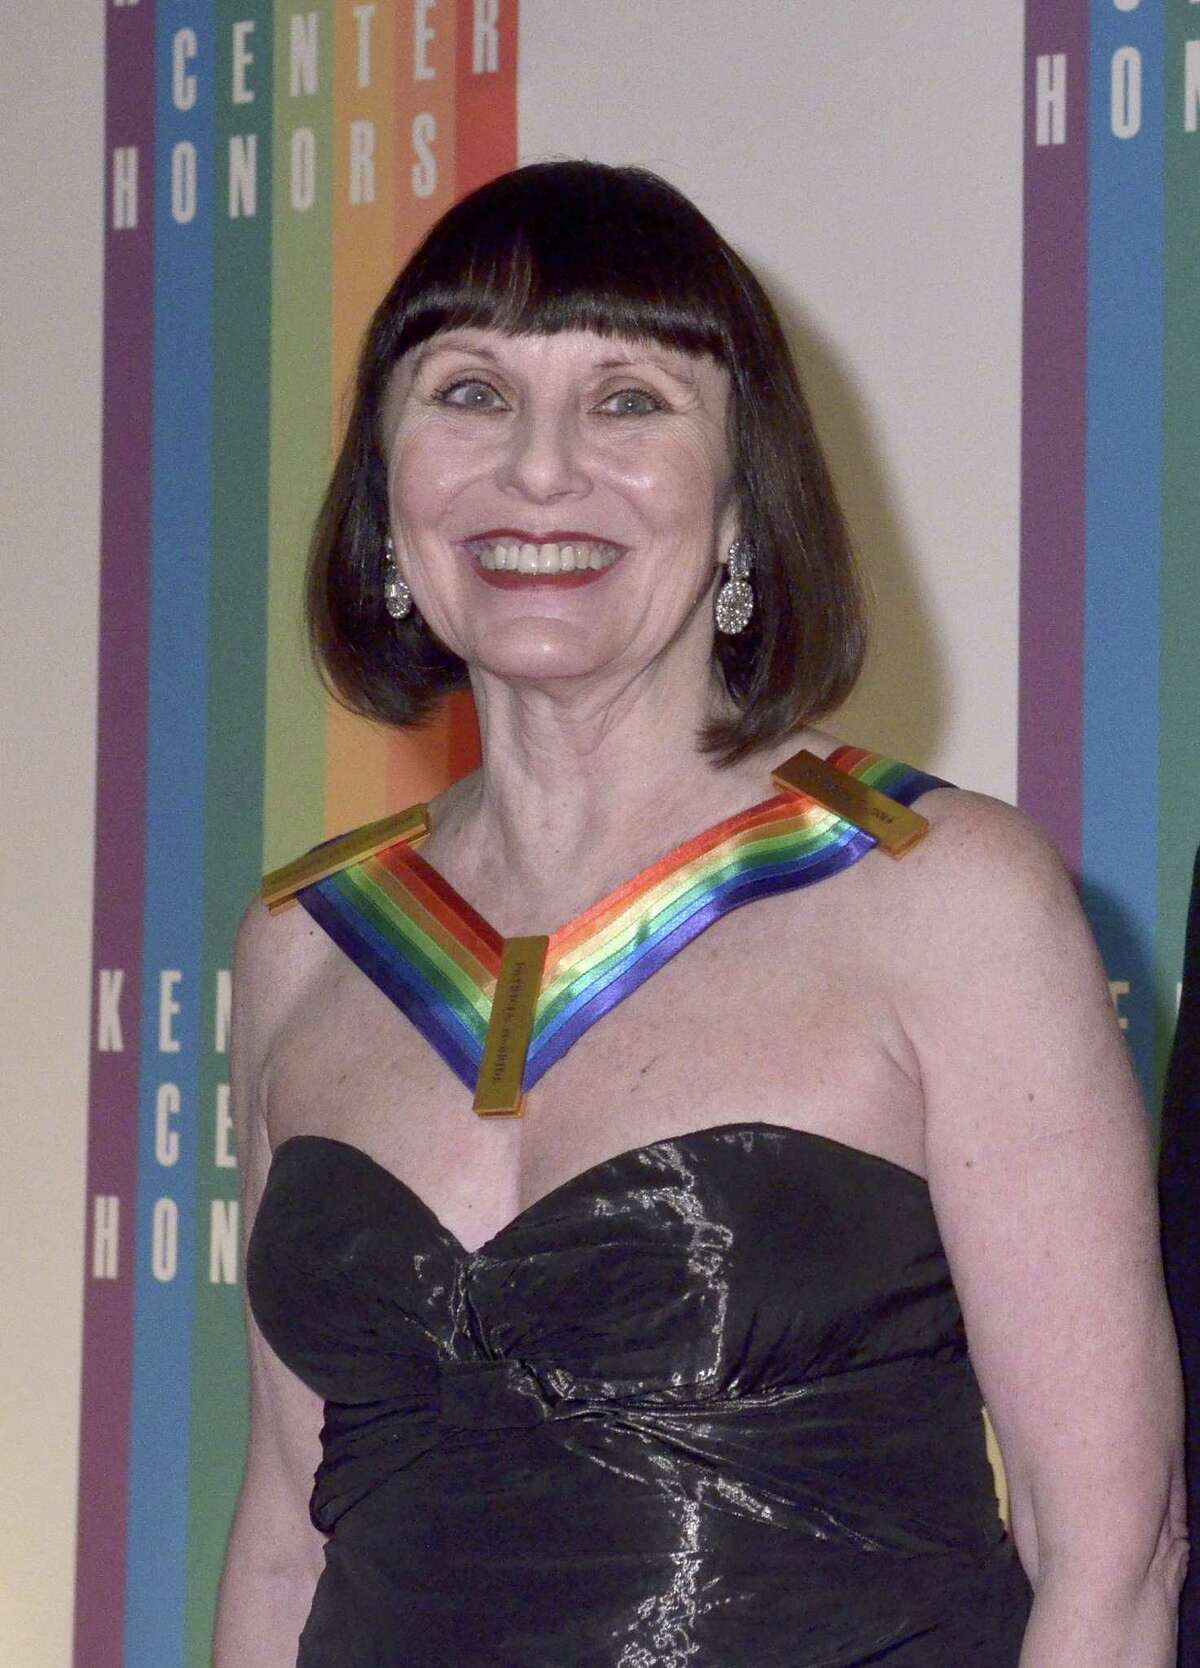 Potpourri: Kennedy Center Honors got to 5